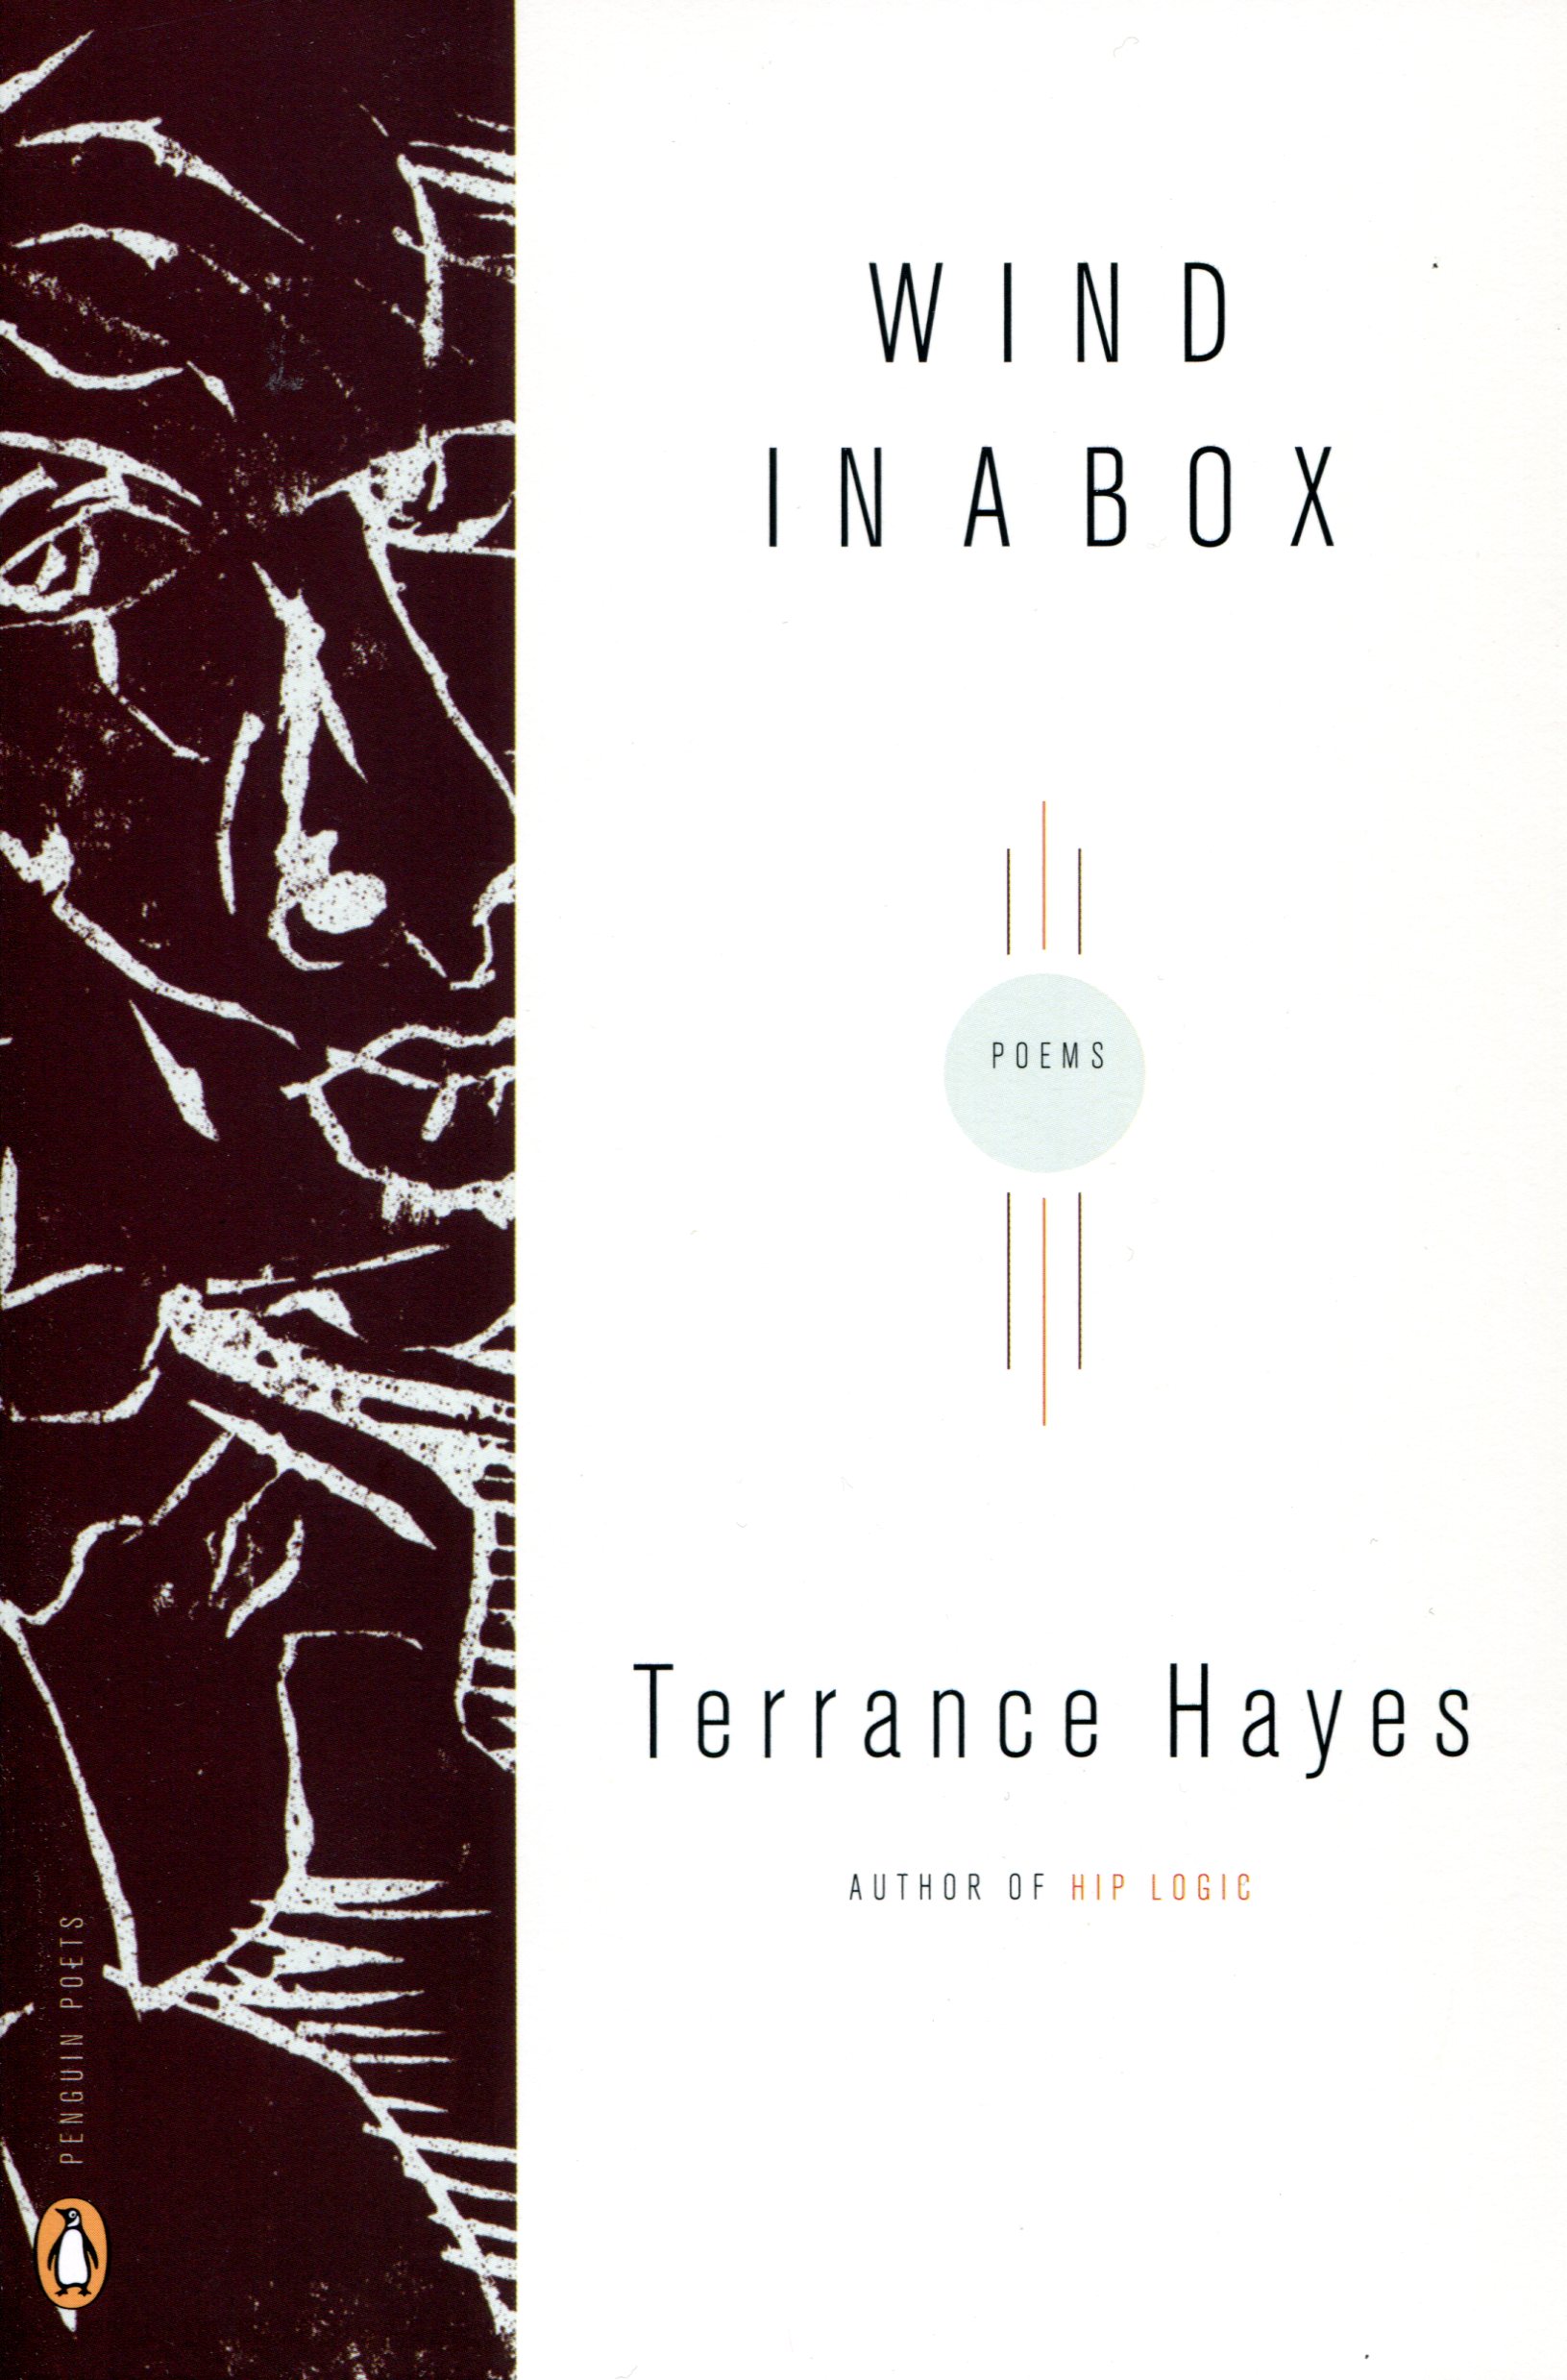 Wind in a Box by Terrance Hayes